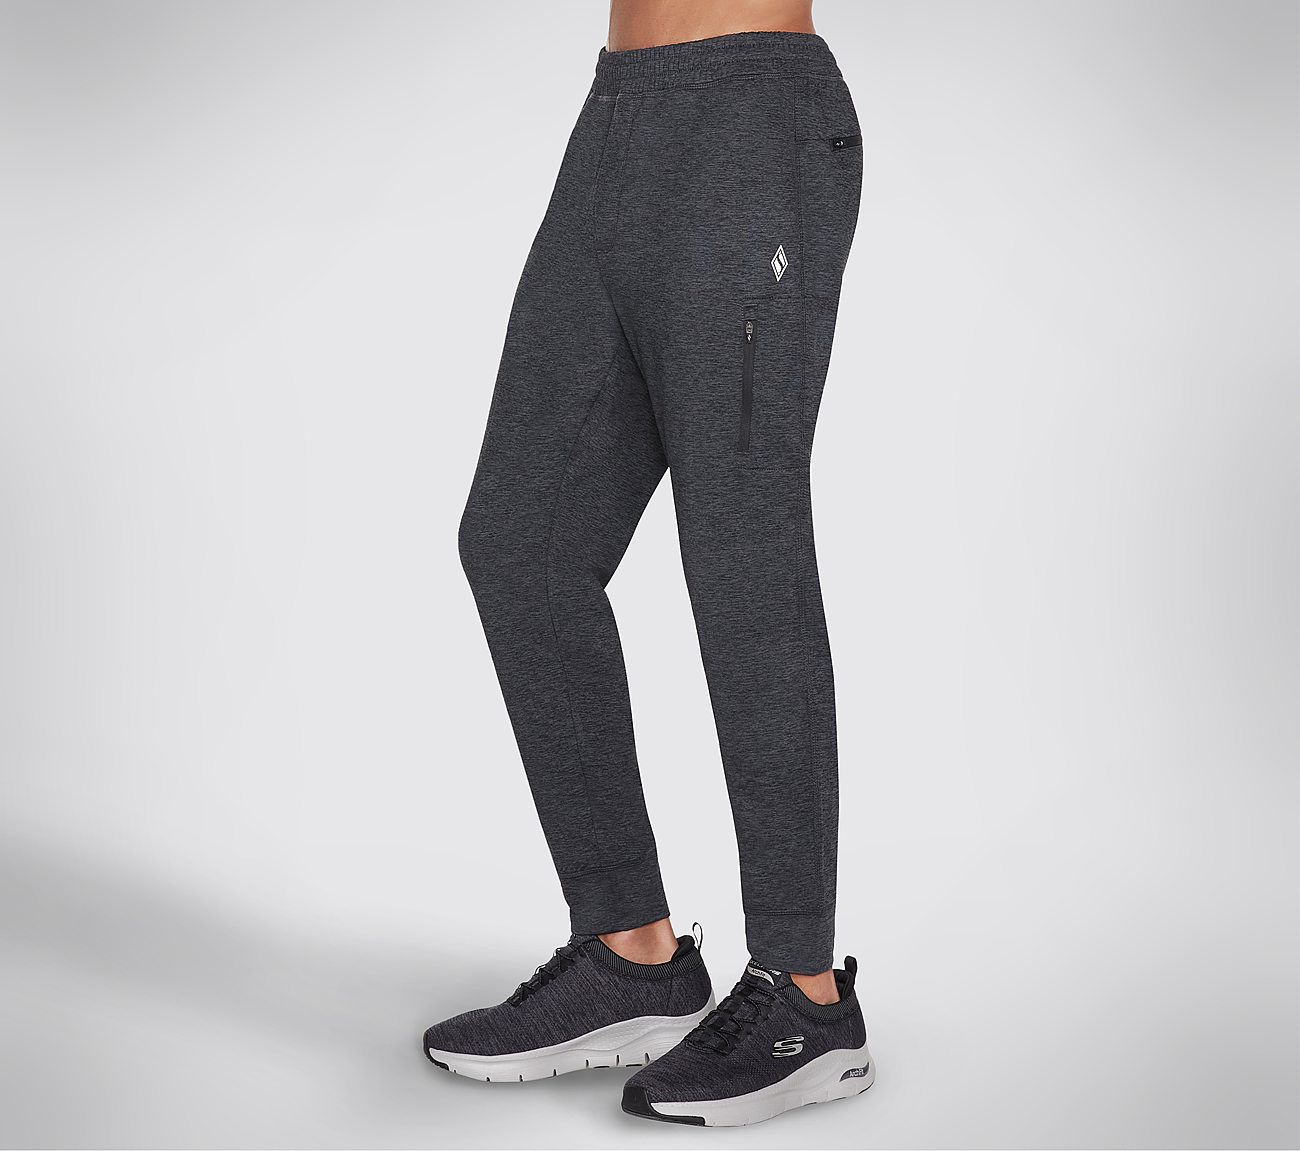 SKECH-KNITS ULTRA GO JOGGER, CCHARCOAL Apparel Bottom View